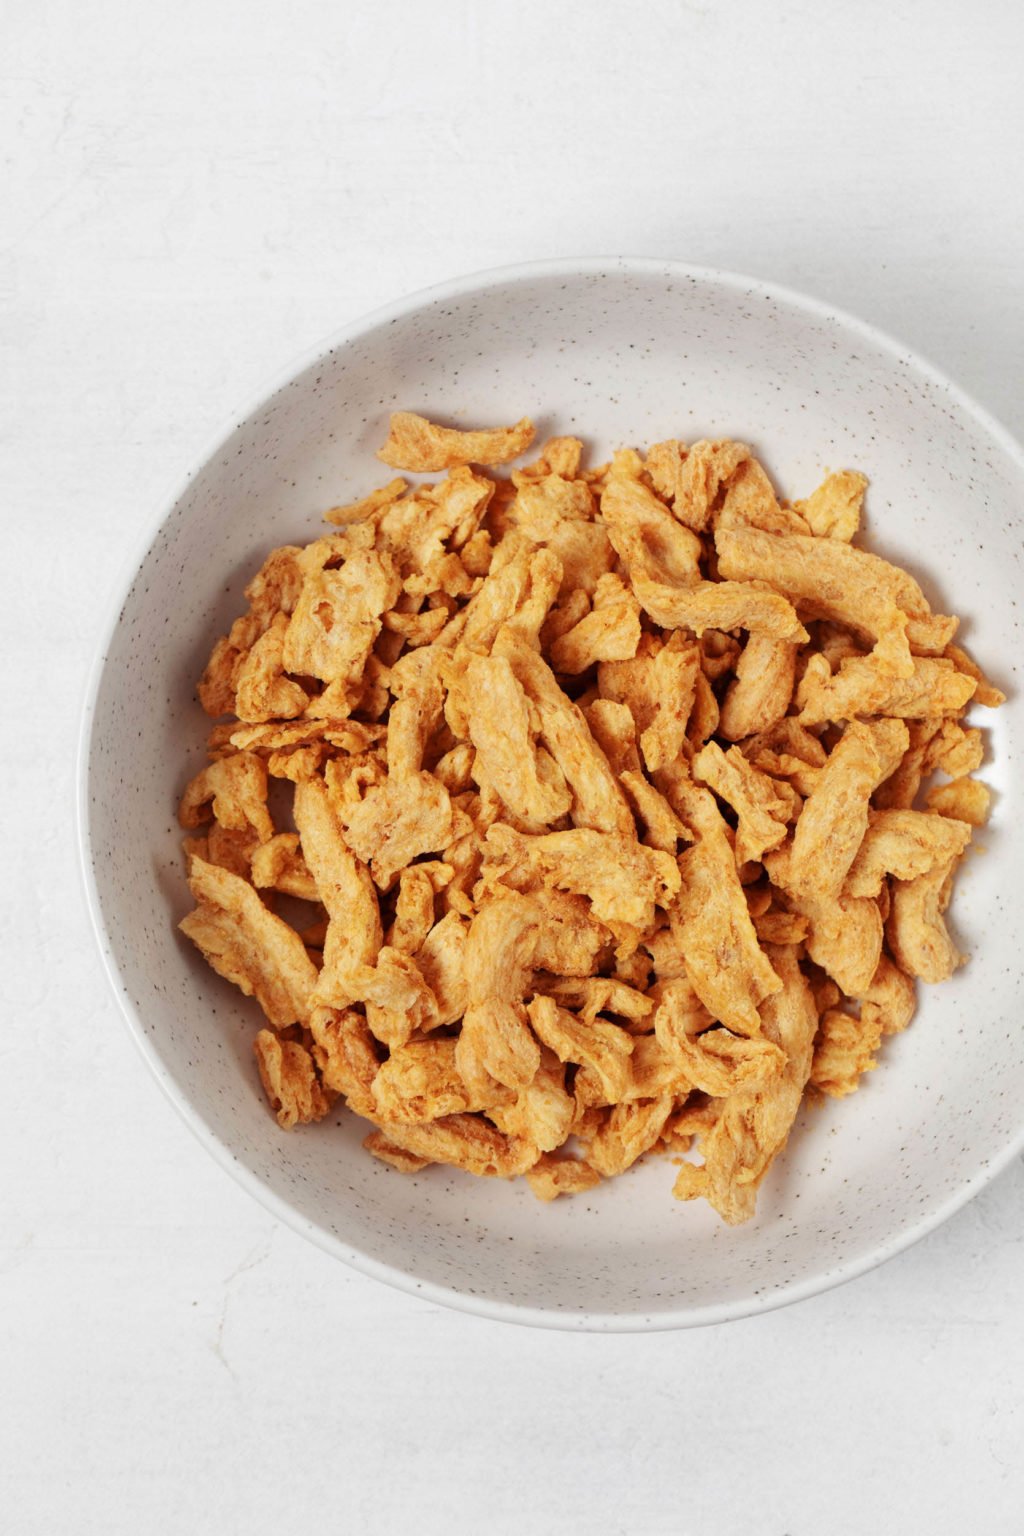 A bowl has been filled with soy curls. The bowl rests on a white surface.